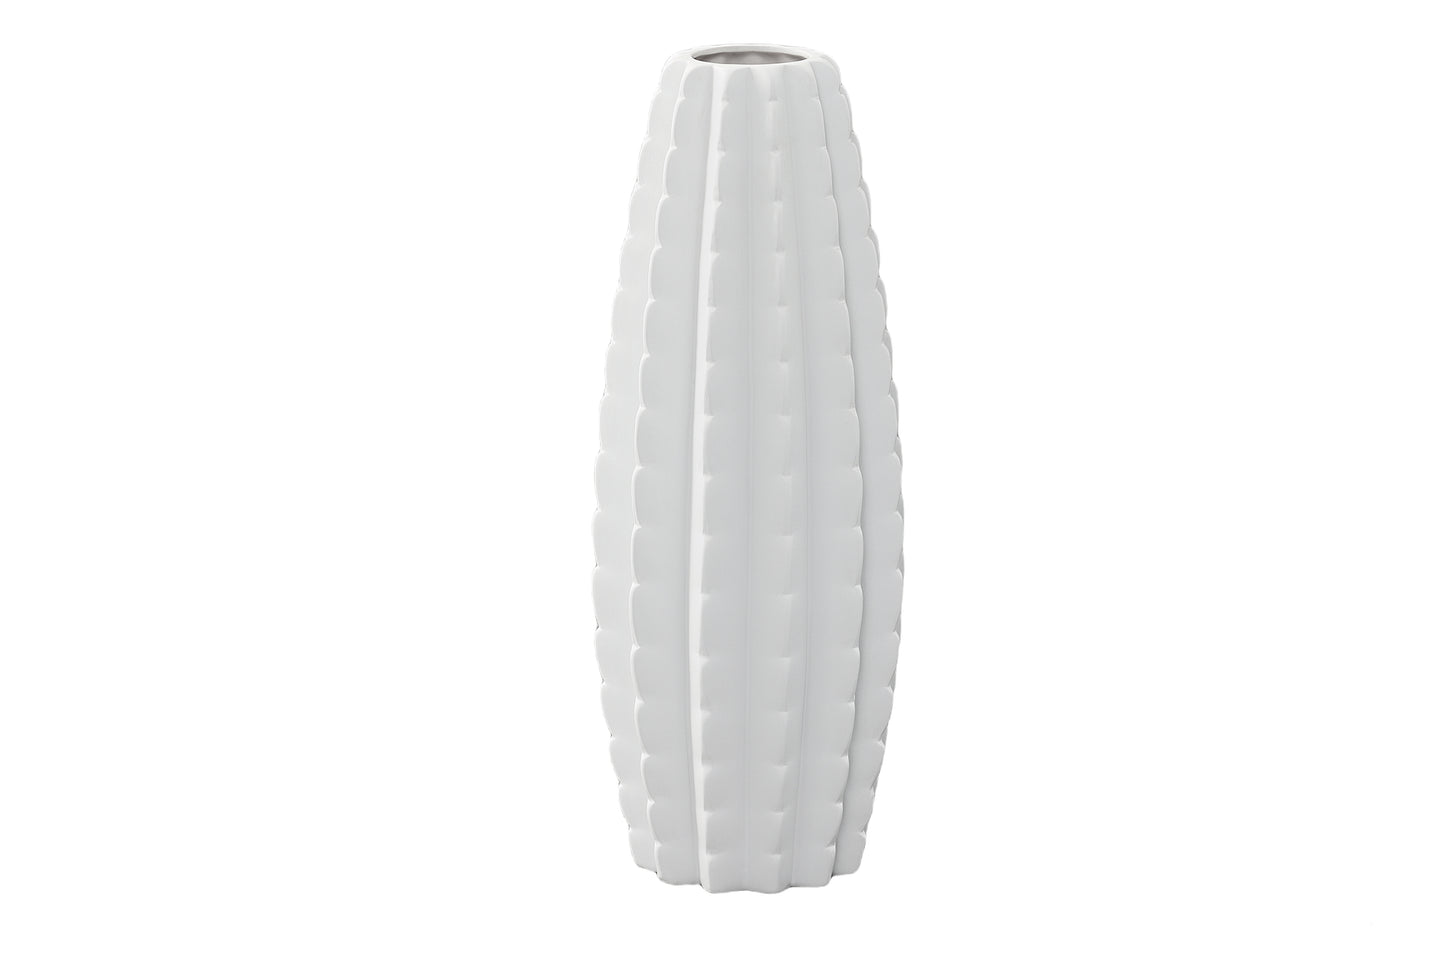 Ceramic Tall Bellied Cylinder Vase with Embedded Wave Design Body and Tapered Bottom Matte Finish White